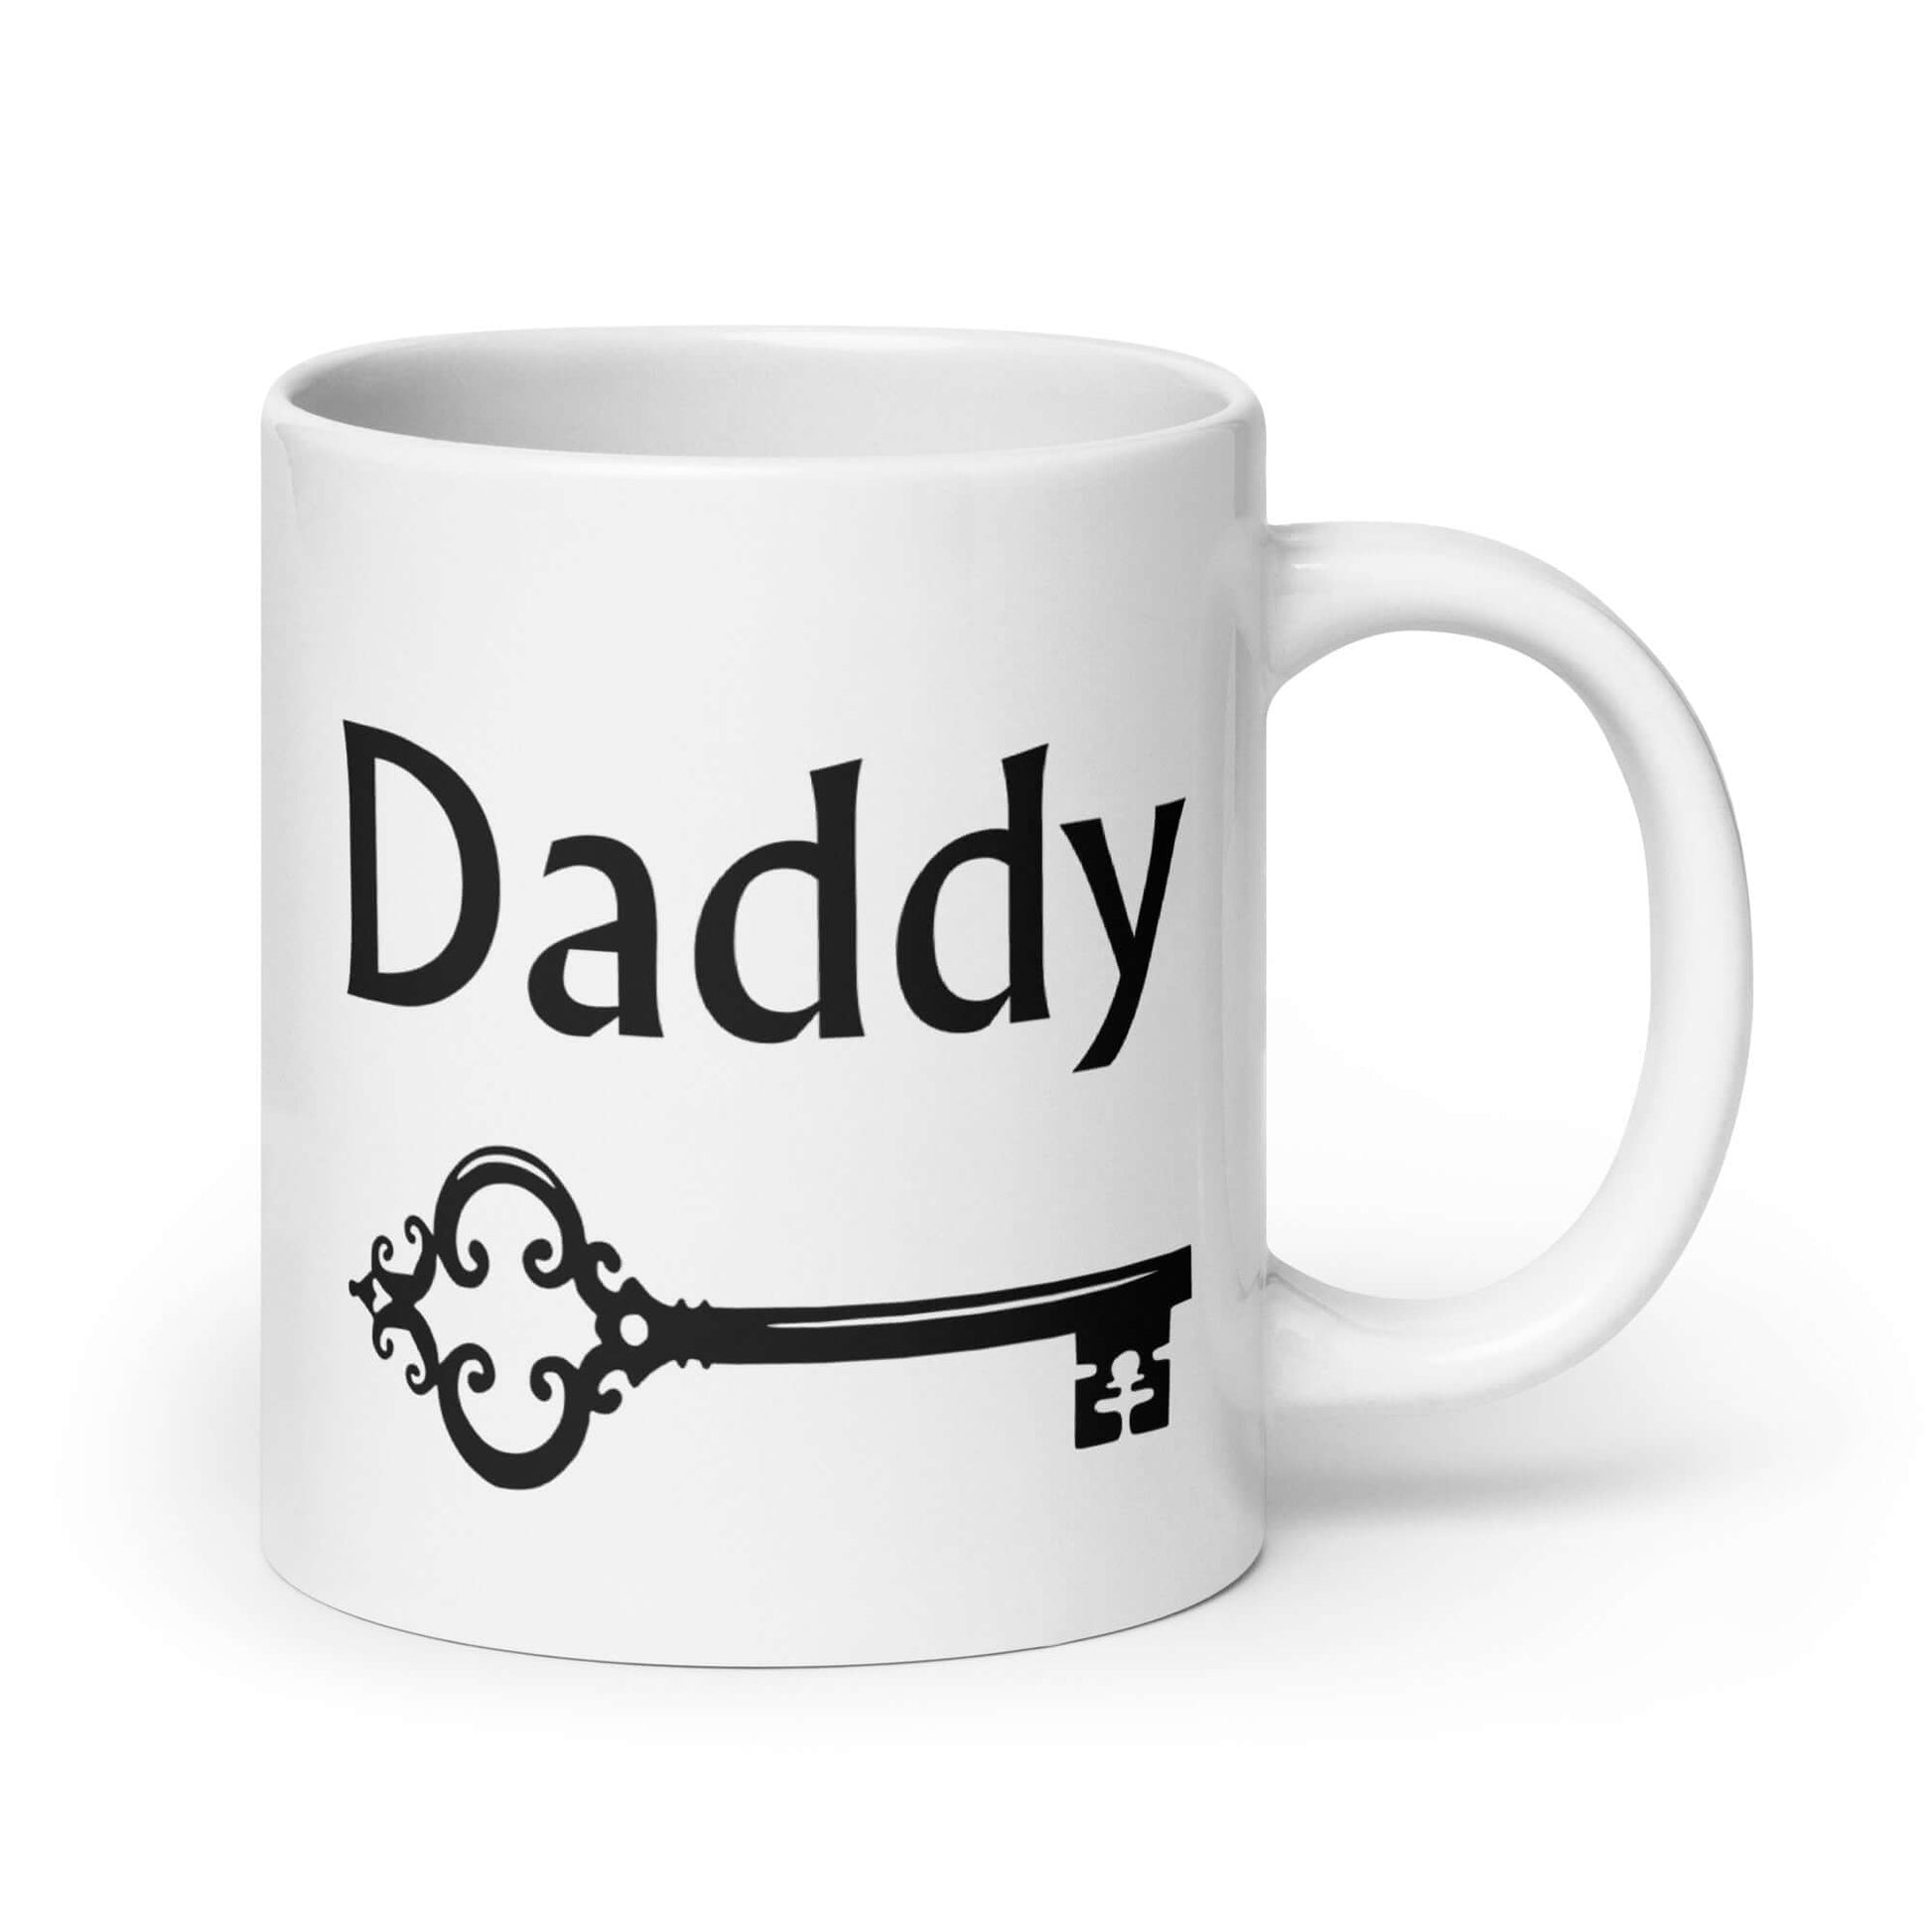 White ceramic coffee mug with an image of a BDSM key and the word Daddy printed on both sides of the mug.